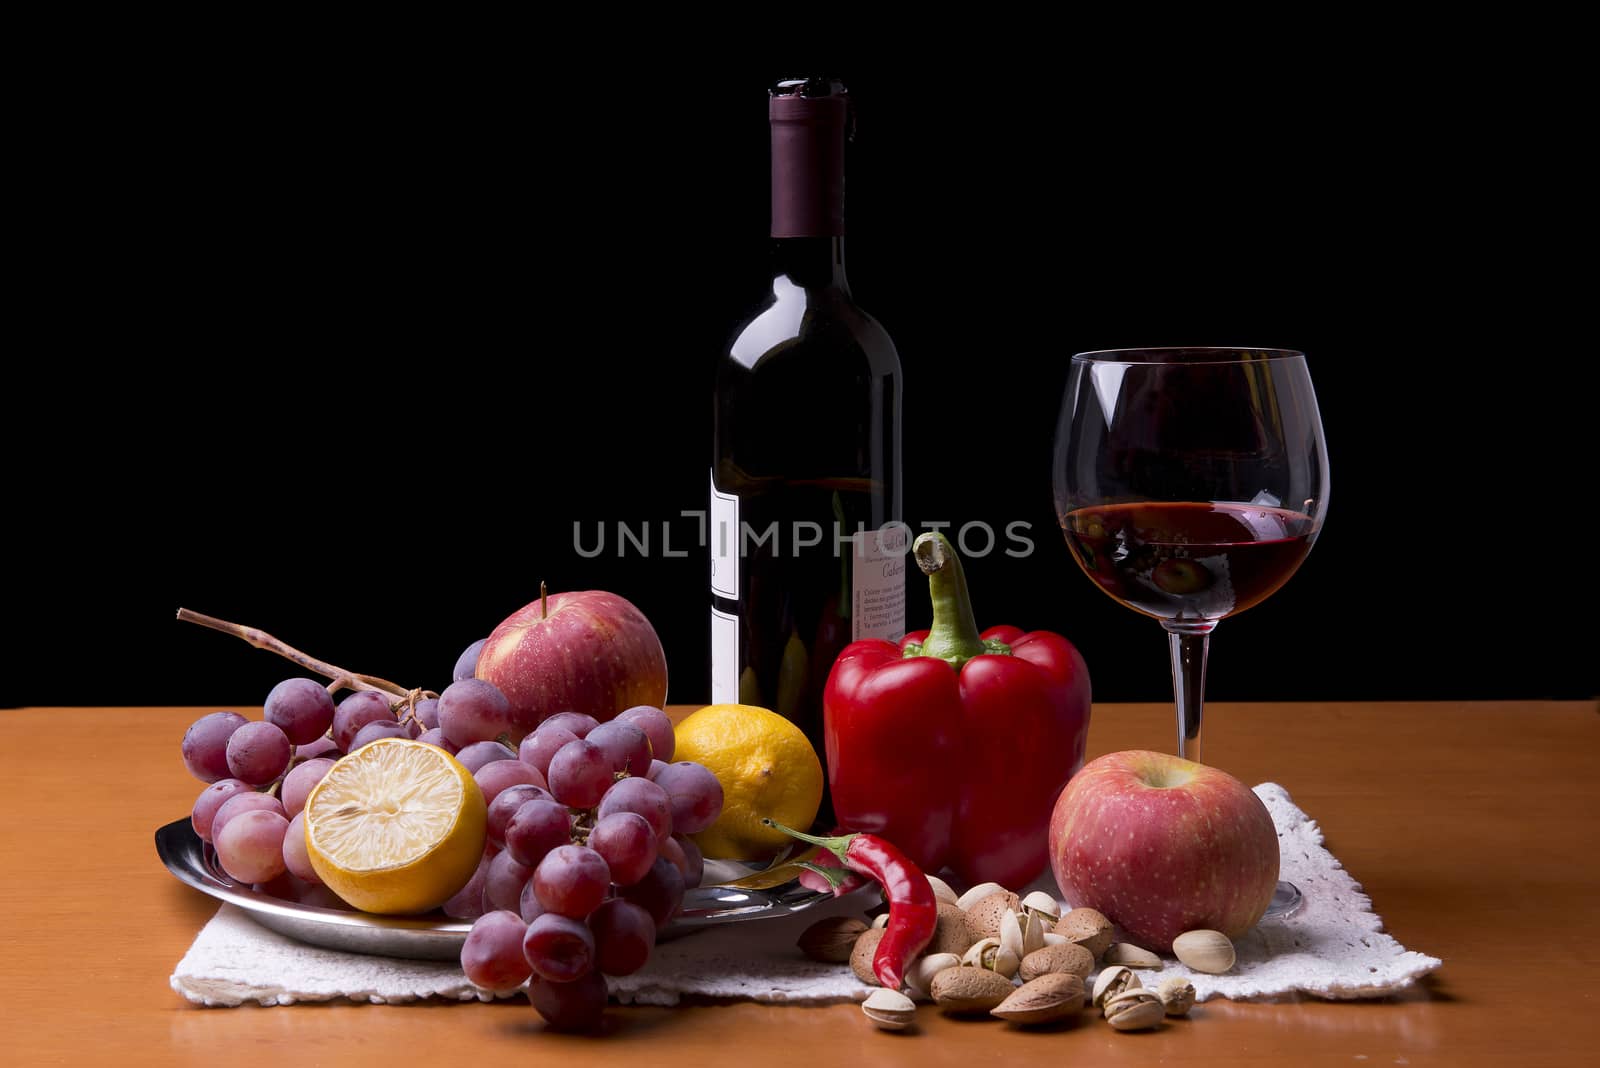 fruits, vegetables and a bottle of red wine on the table